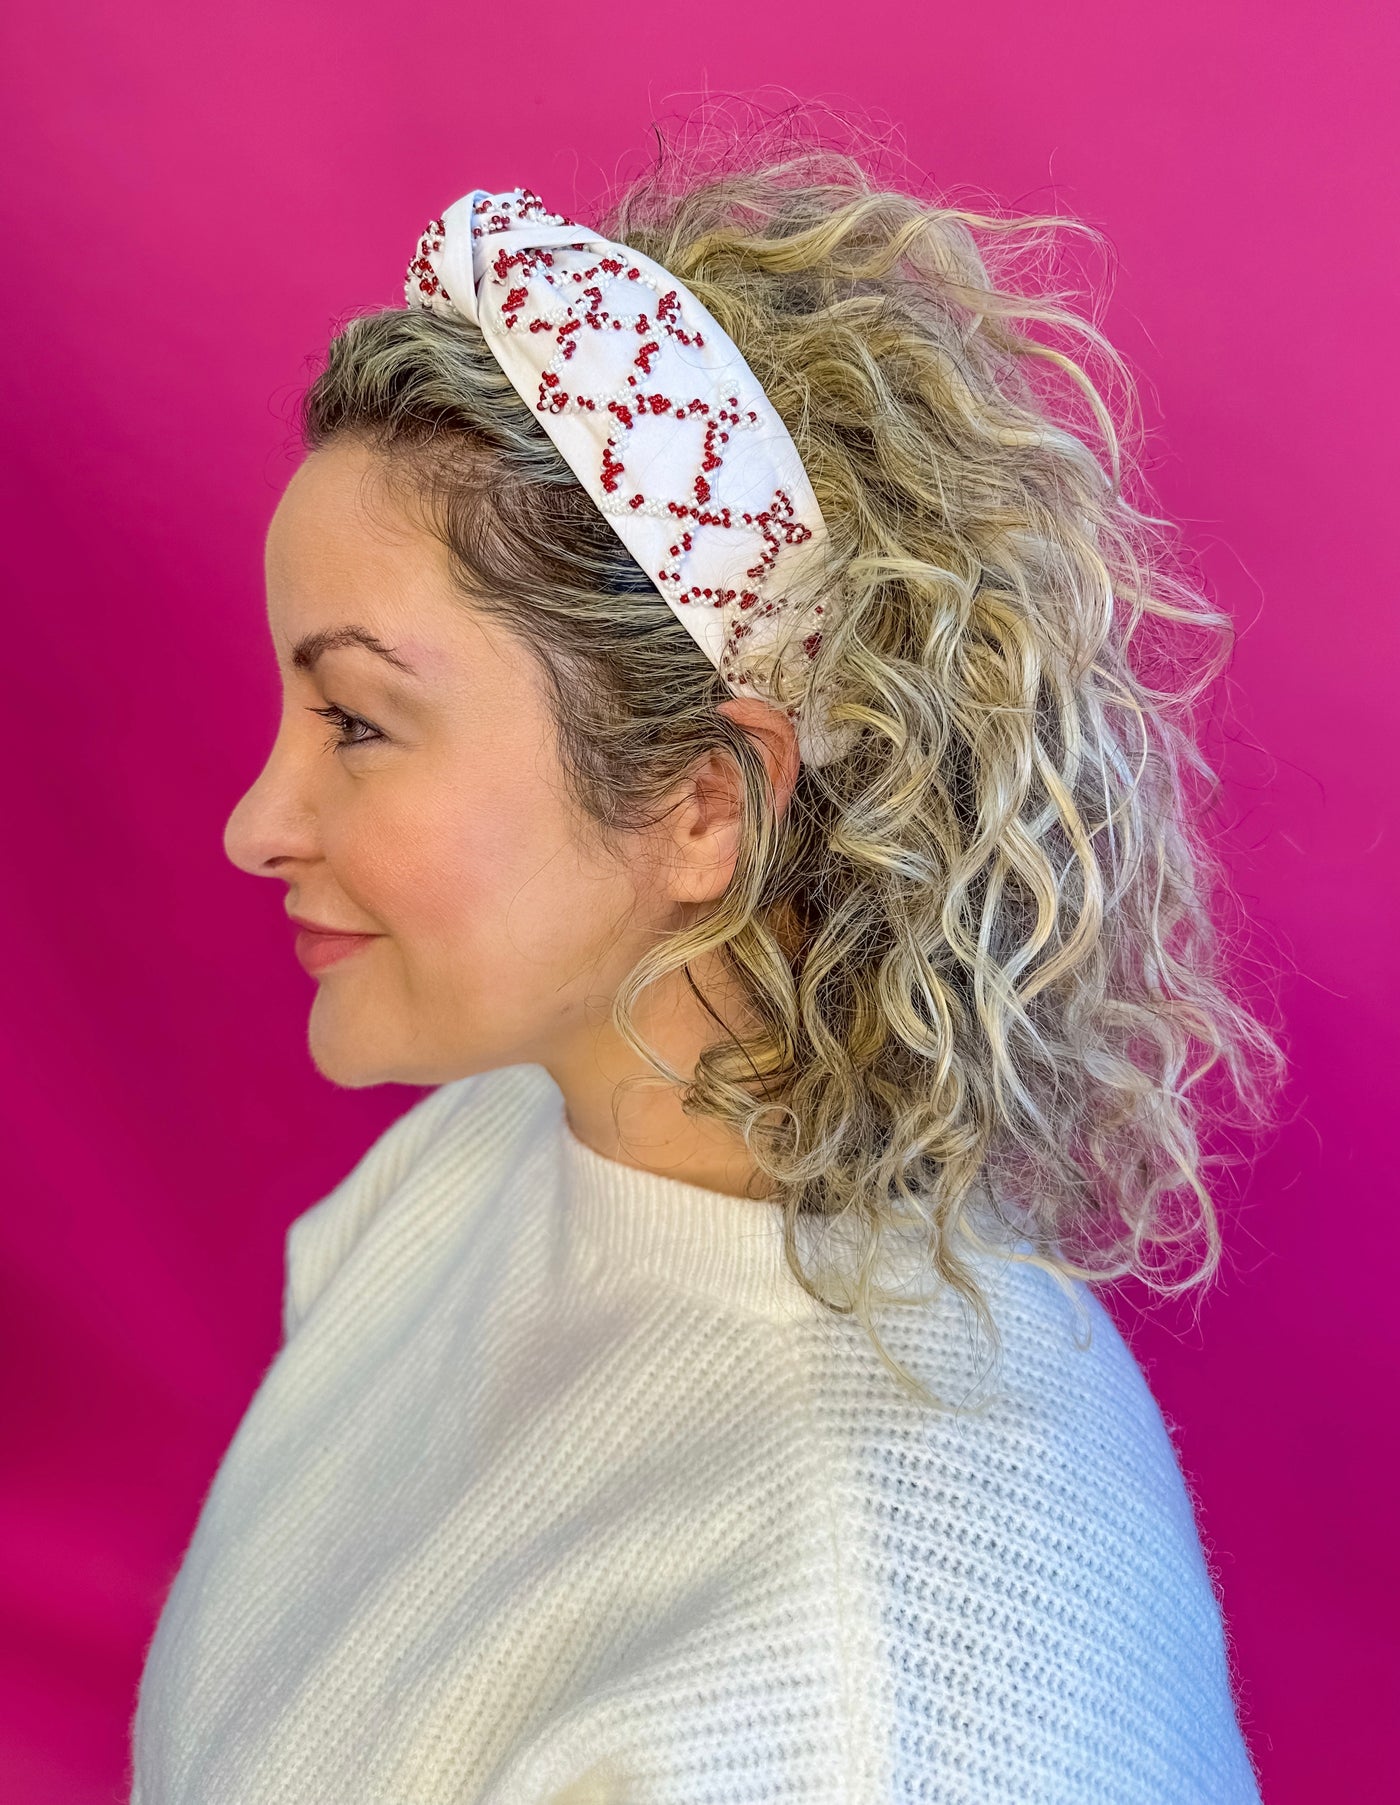 Sprinkle Headband - White and Red